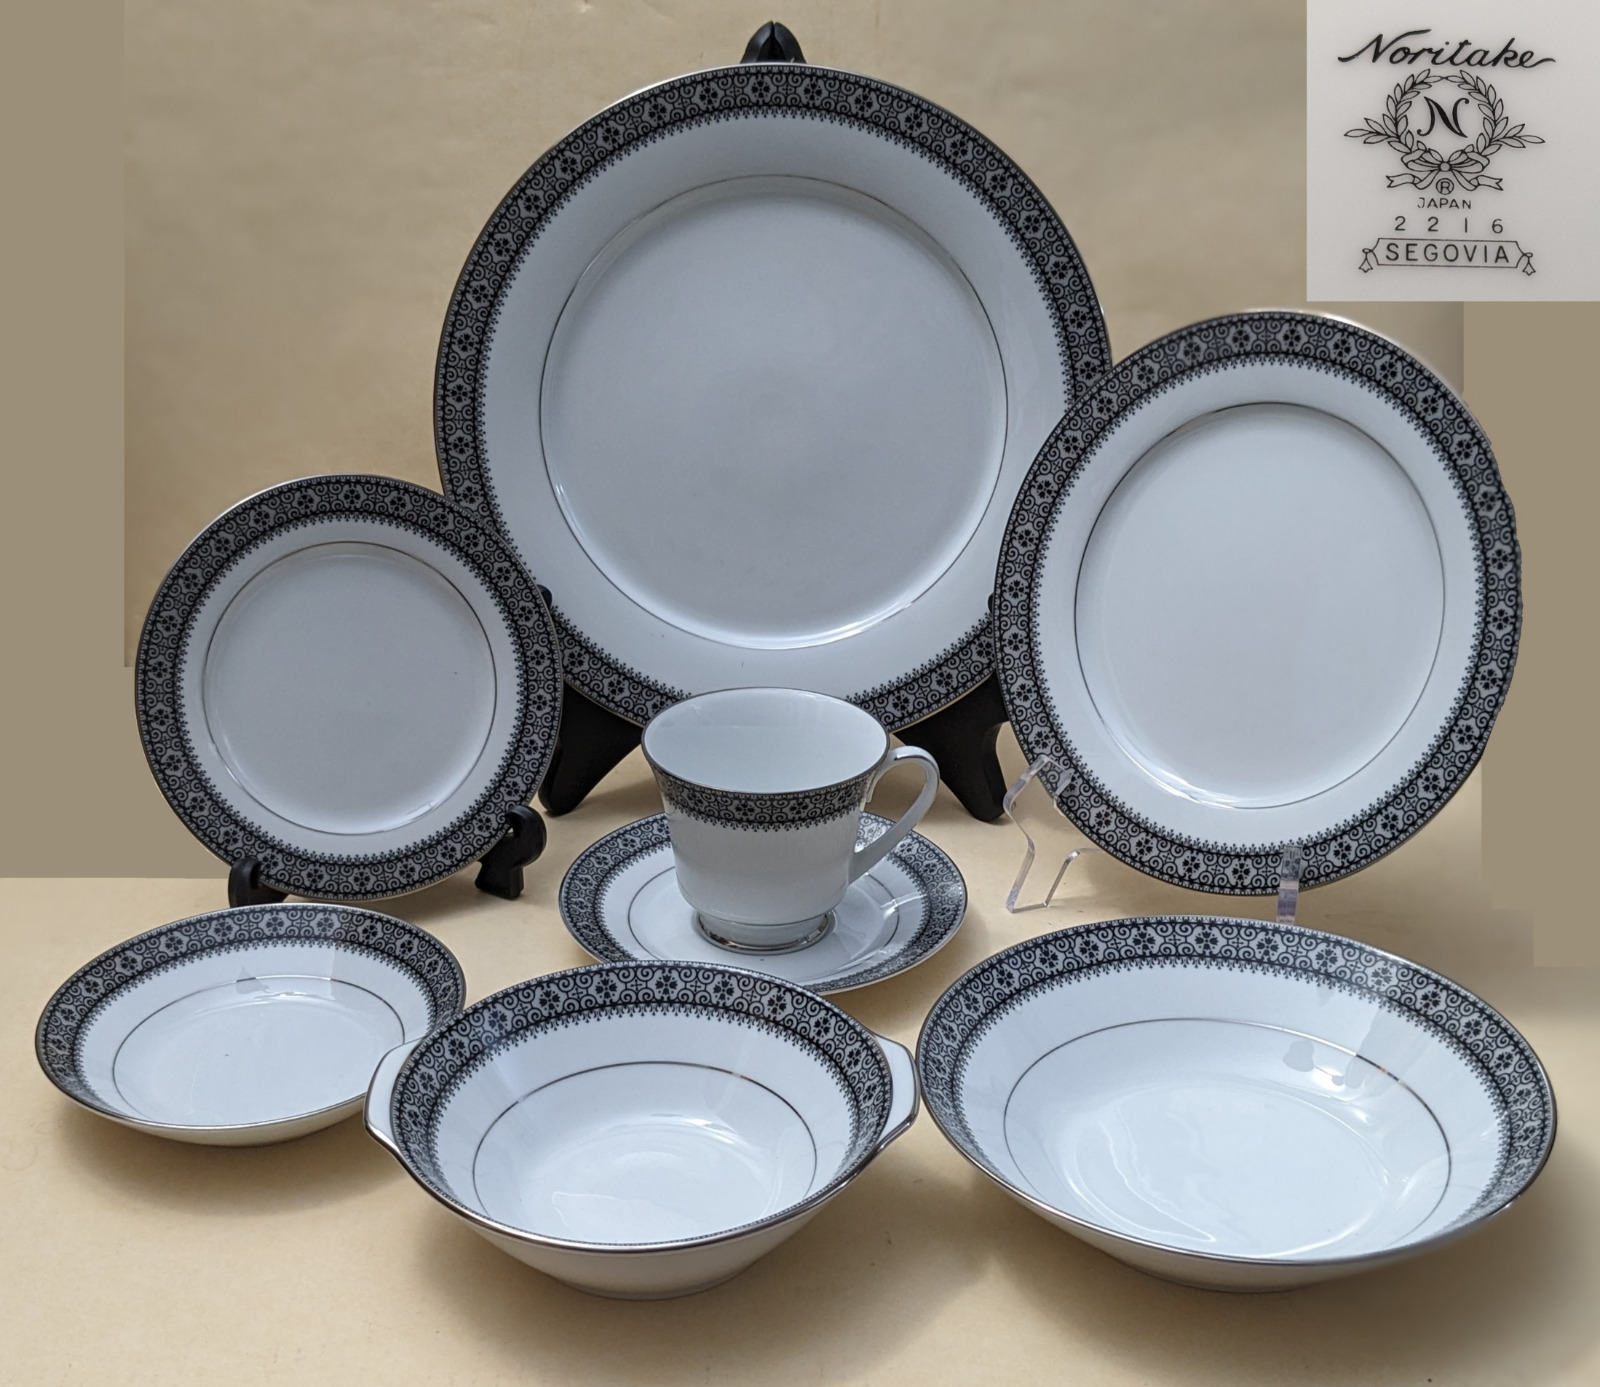 DINNERWARE-Segovia by Noritake-8 Piece Place Setting. Discontinued/New.